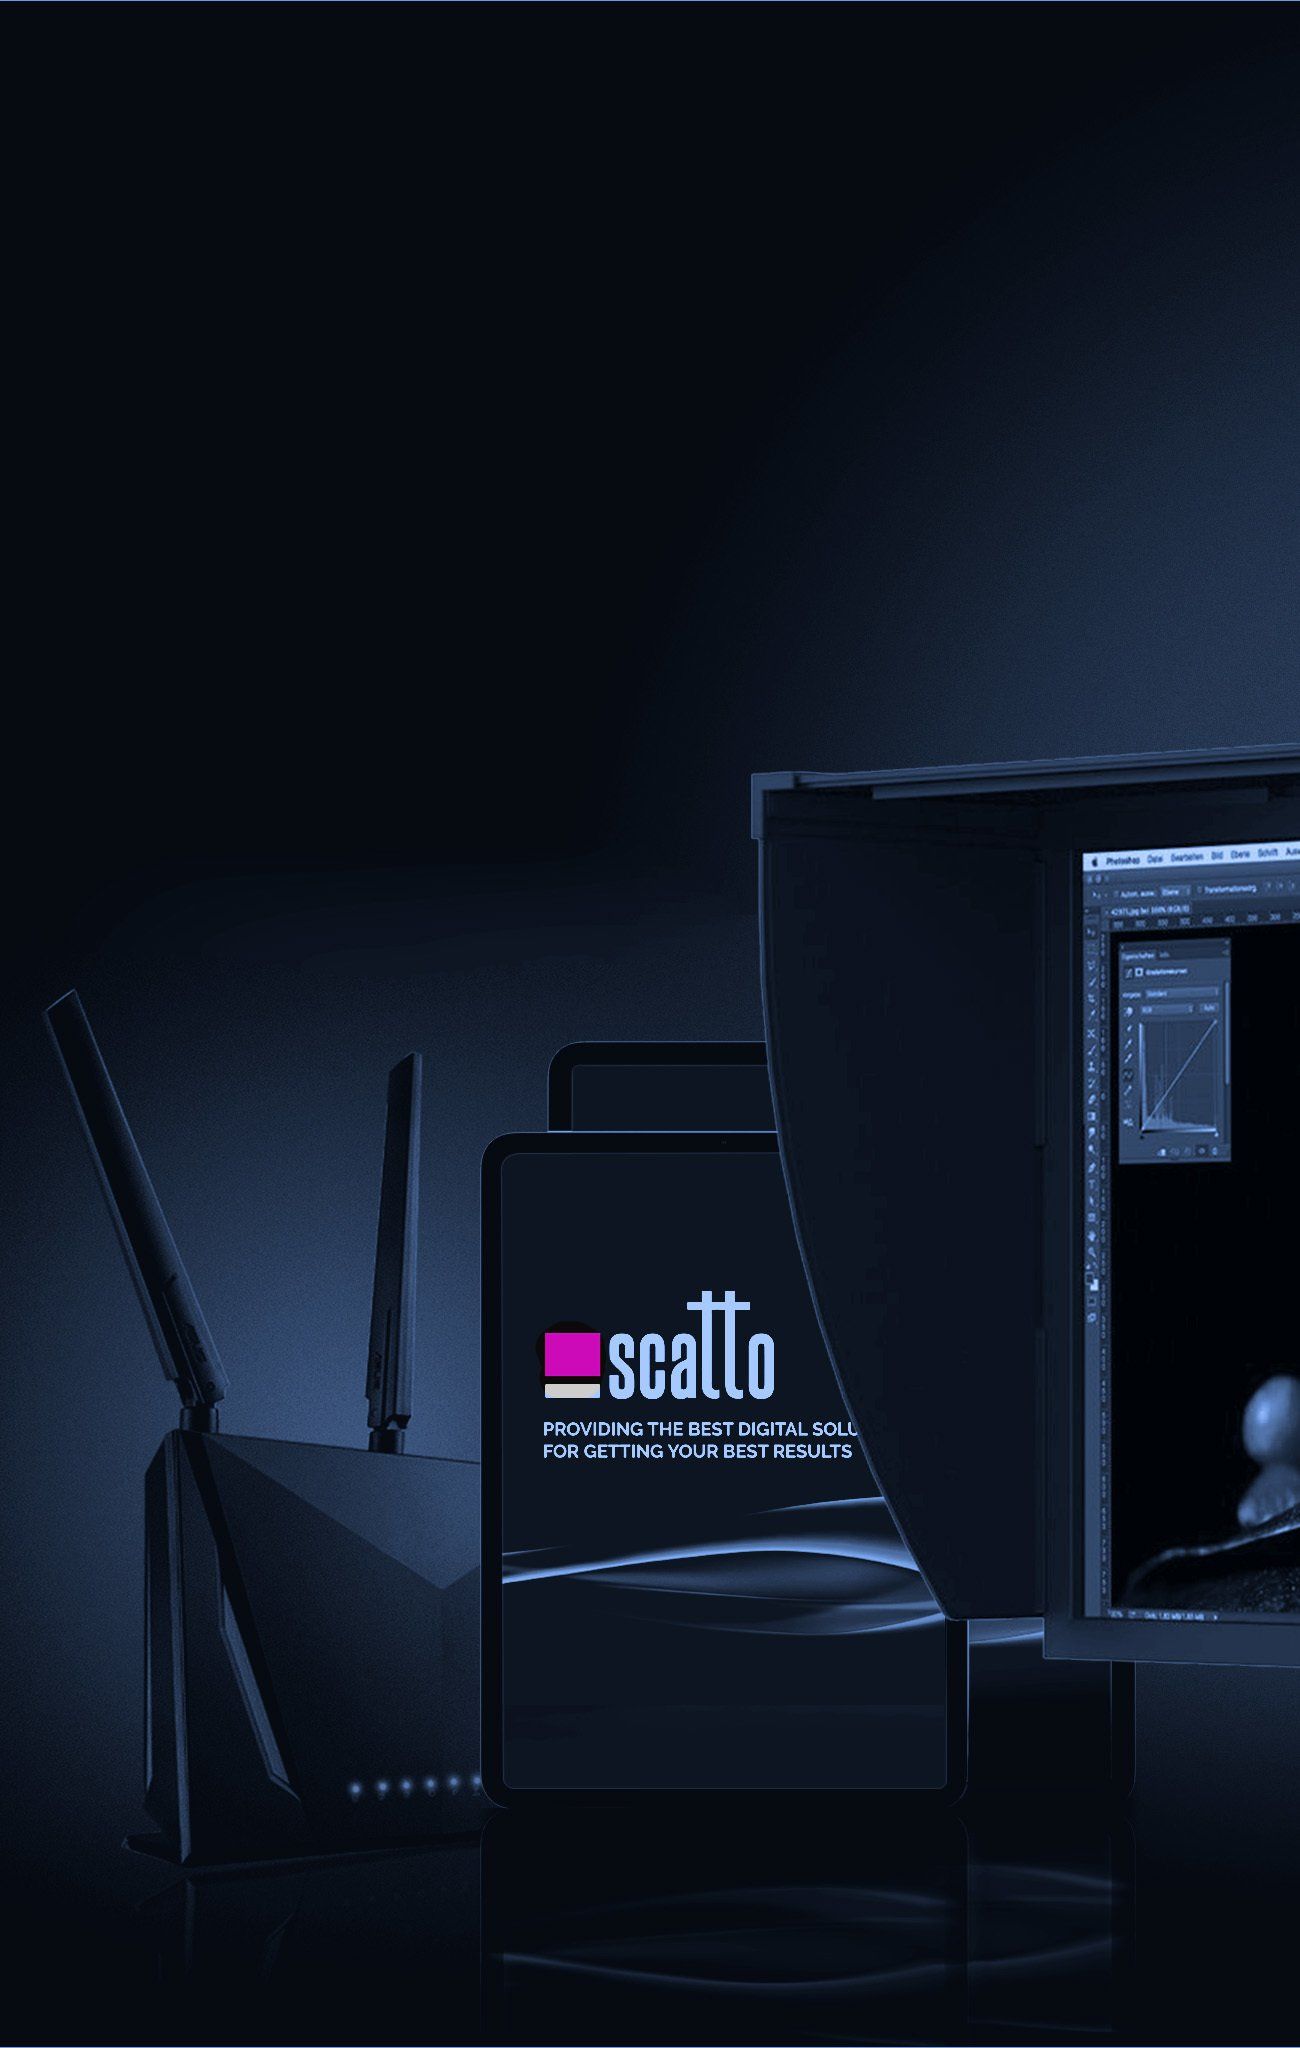 Scatto Digital Solutions-Photo & Video Streaming Onset and Worldwide-photography digital technician-digital equipment rental for photography-Madrid-Spain